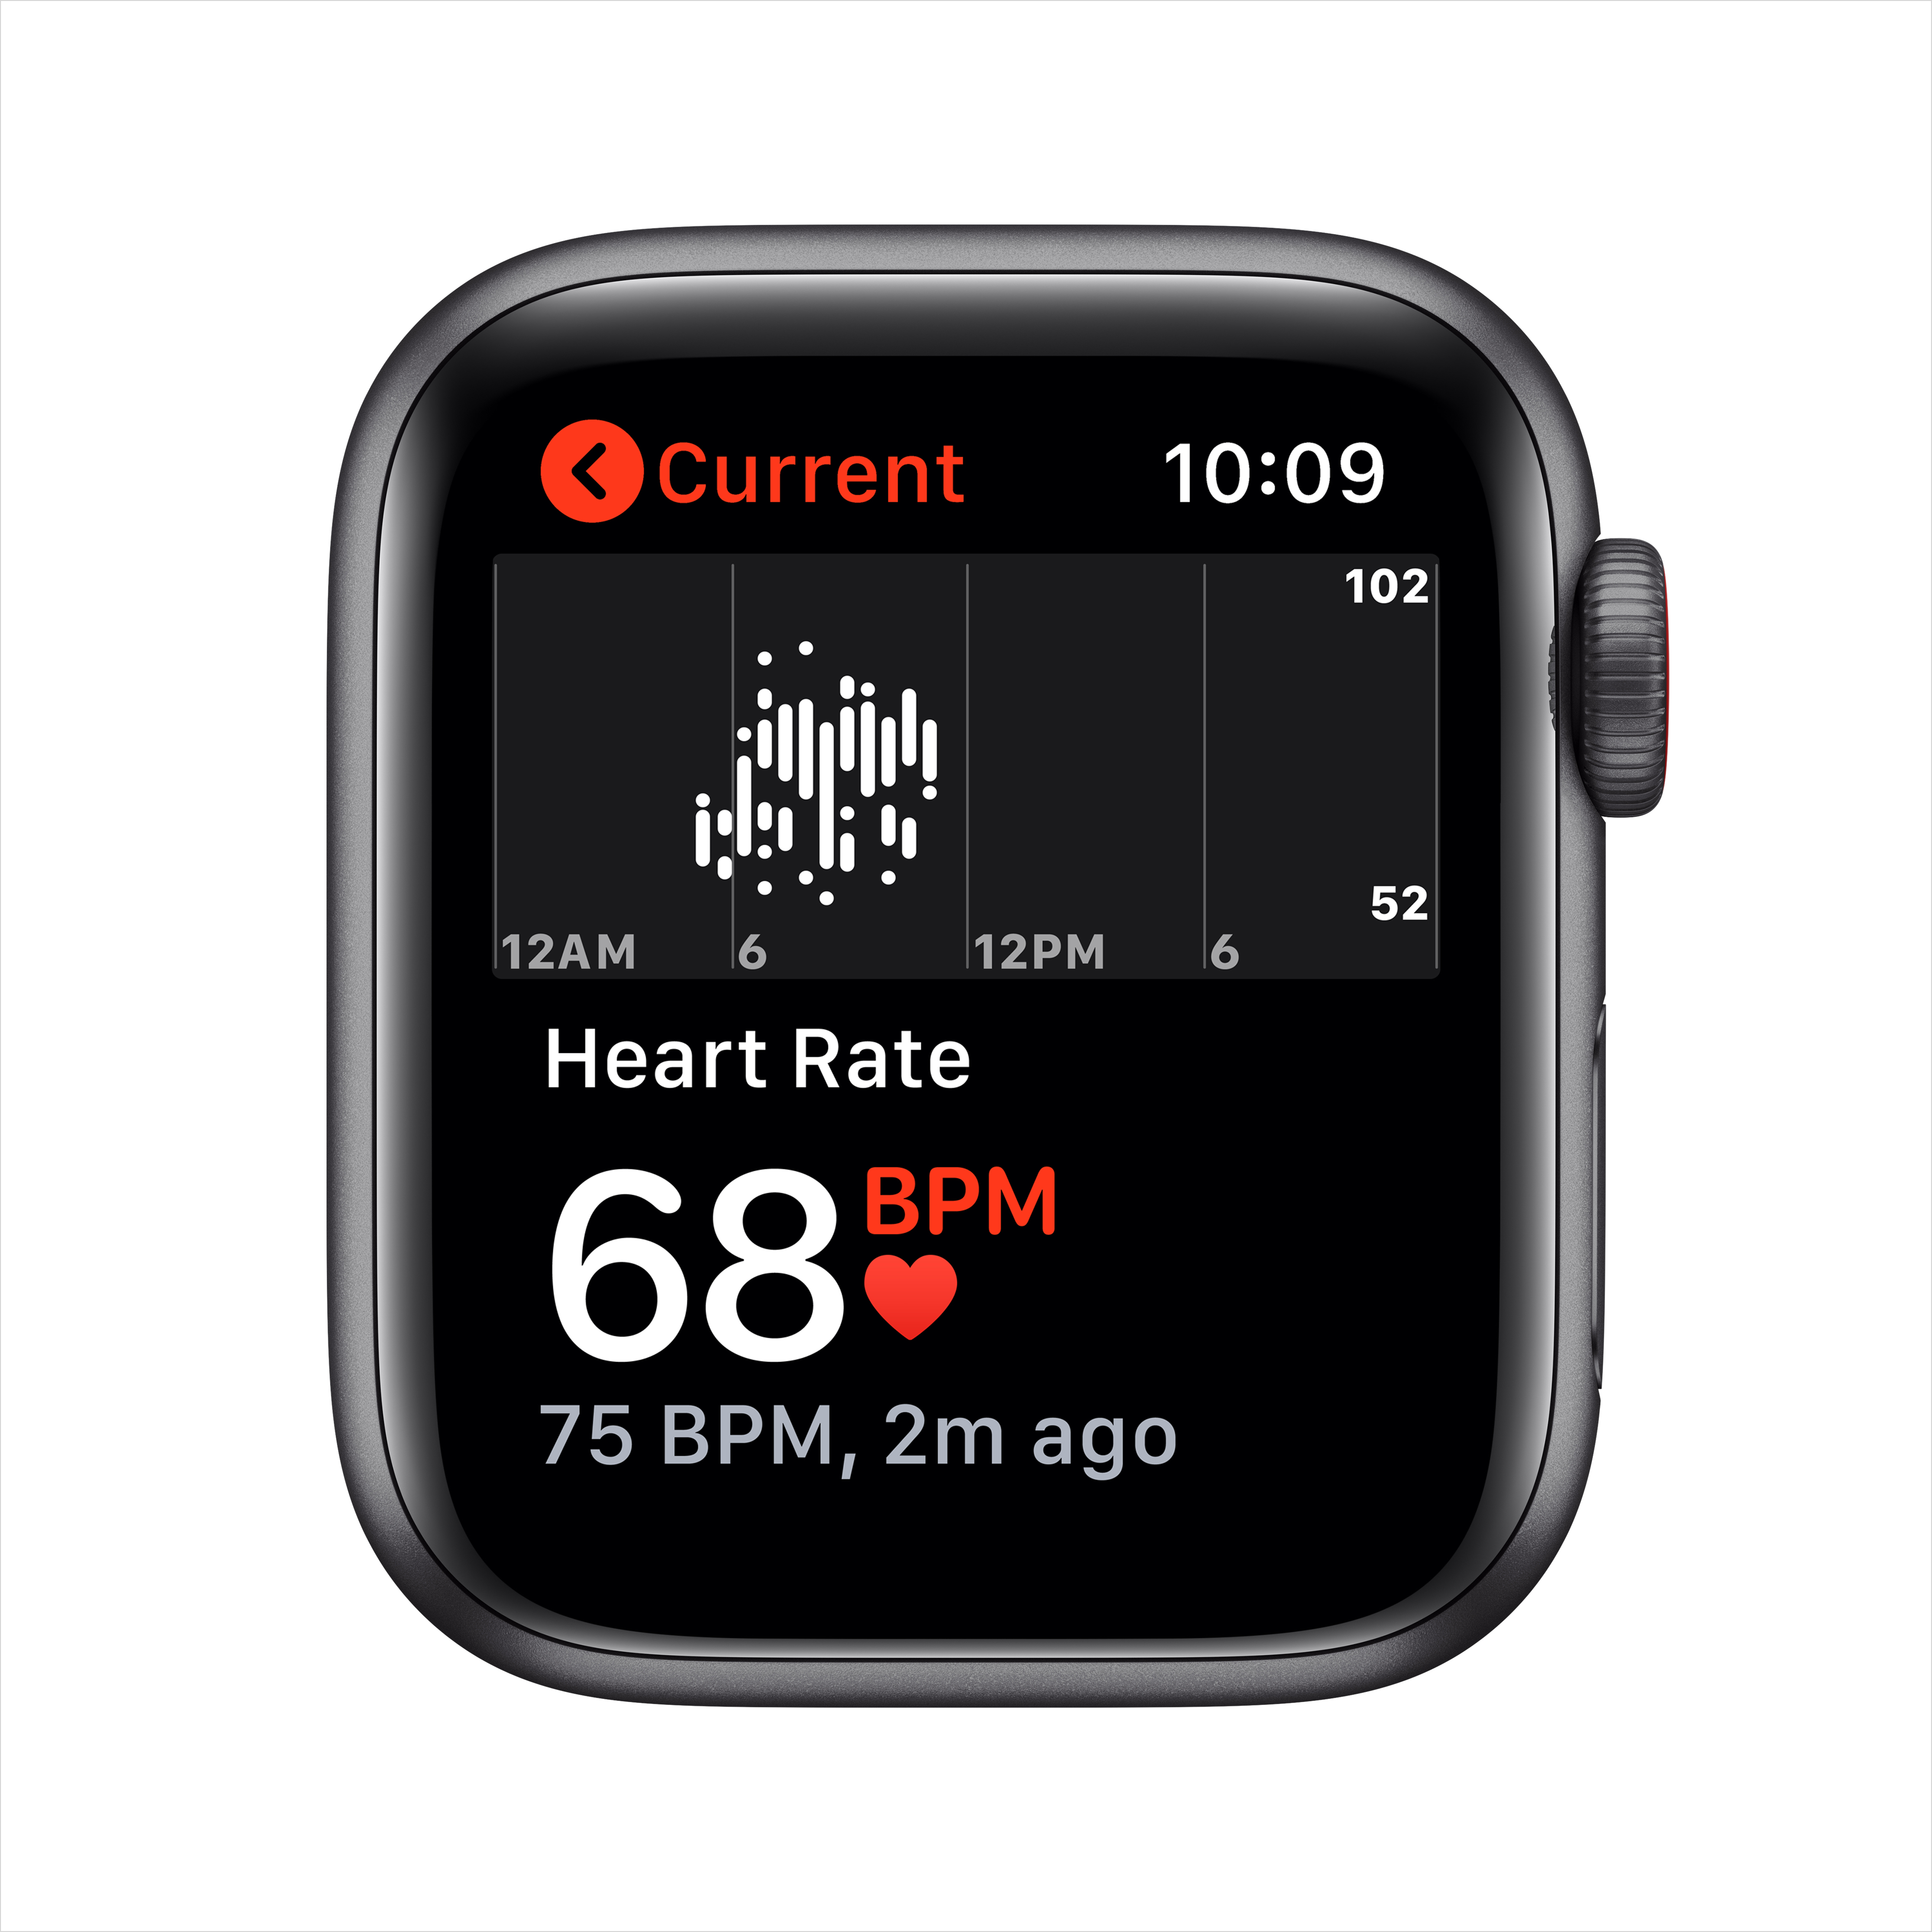 Apple Watch SE (1st Gen) GPS, 44mm Space Gray Aluminum Case with Black Sport Band - Regular - image 5 of 9